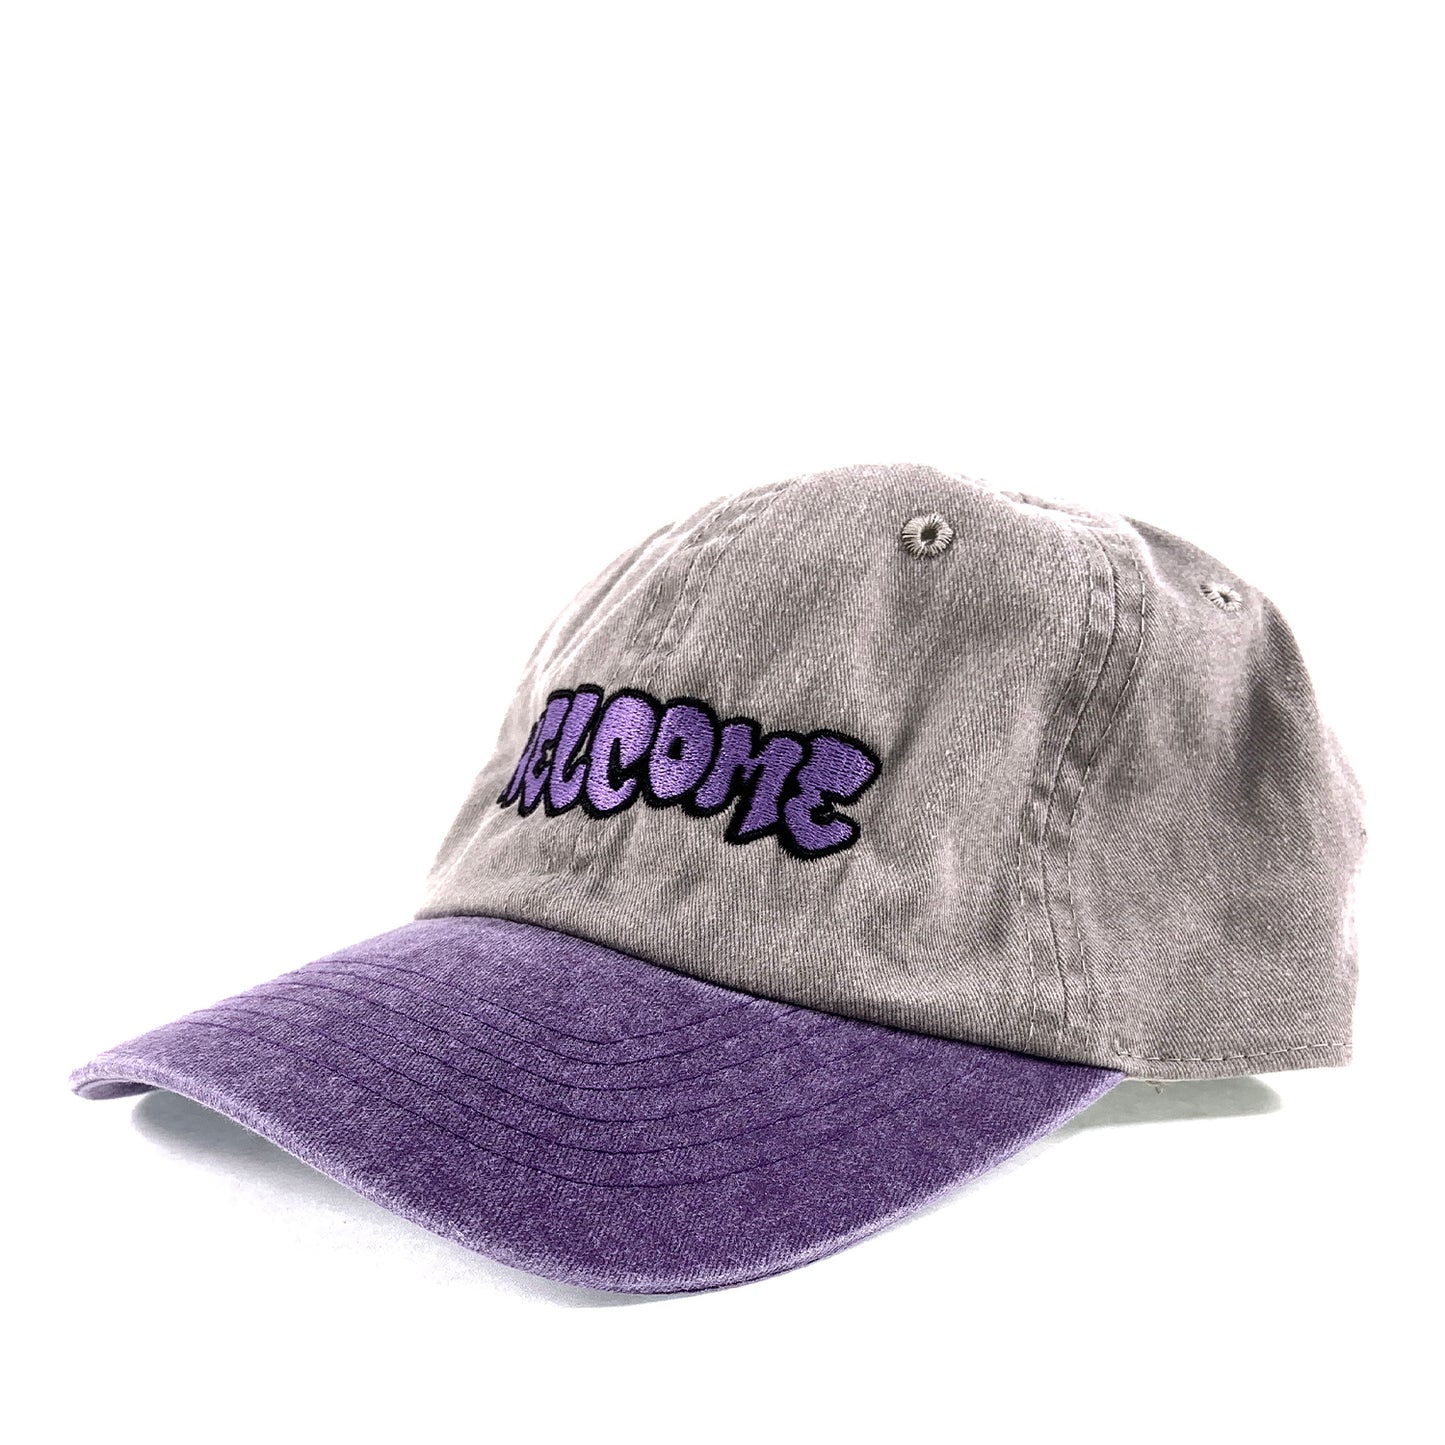 Welcome Bubble Stone-Washed Hat - Khaki / Plum - Prime Delux Store